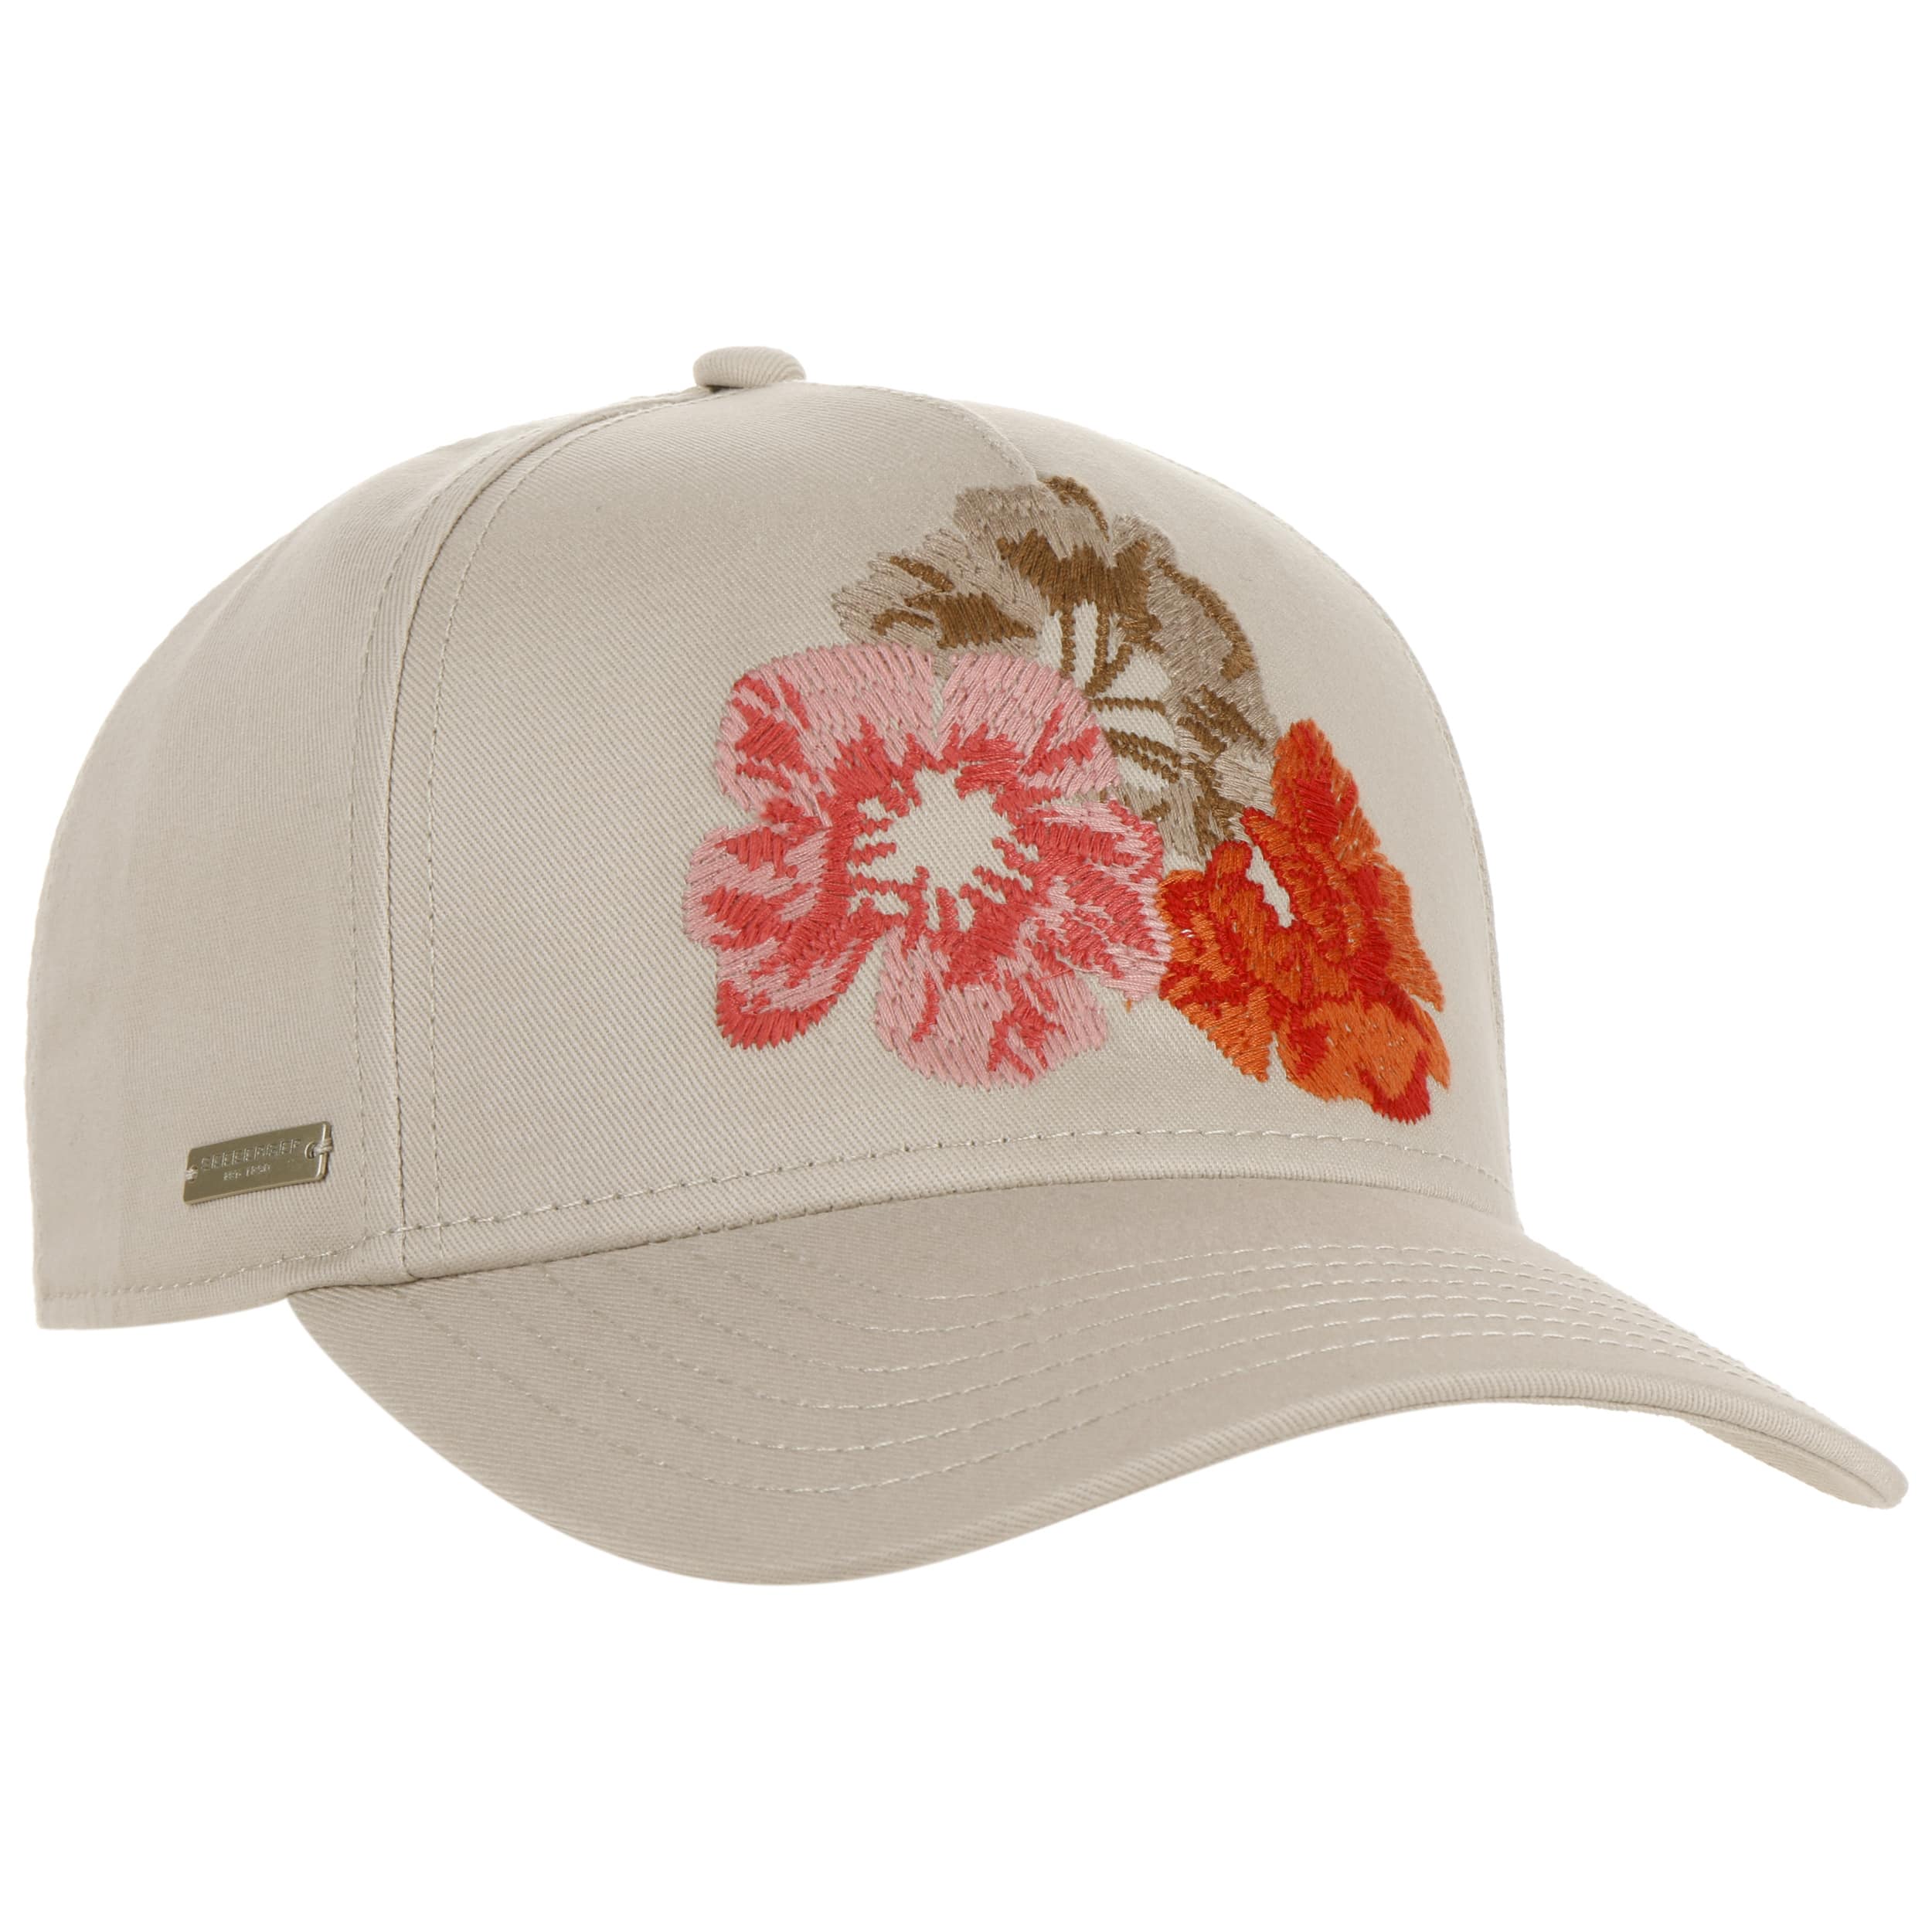 € - 29,95 Stitched Seeberger Cap Flowers by